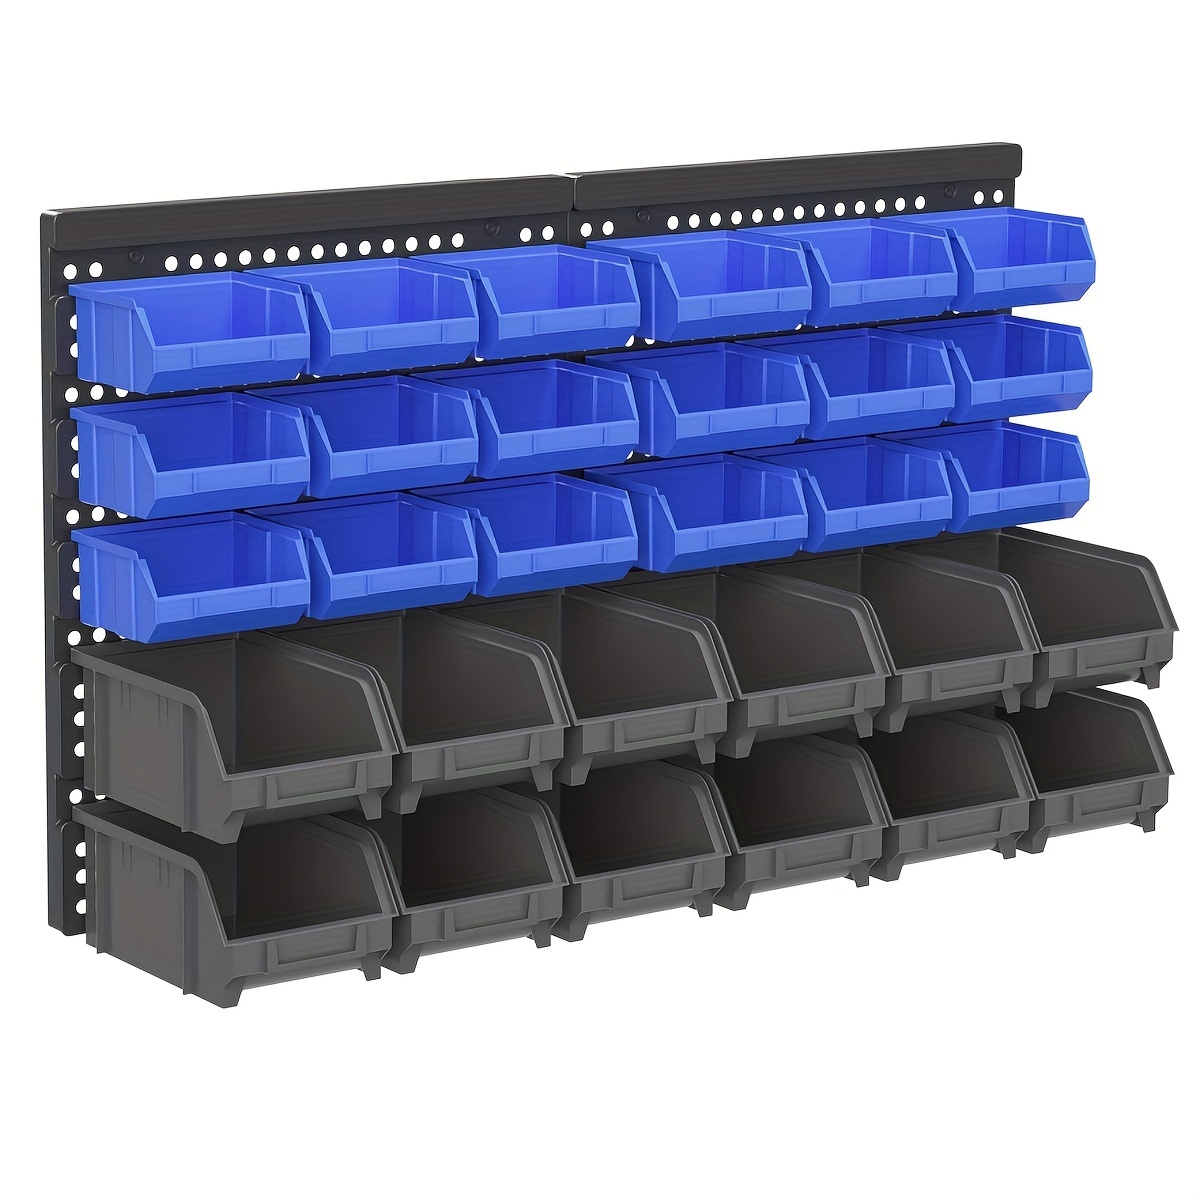 

Wall-mounted Tool Organizer With 30 Storage Bins And Durable Pegboard - Plastic Hanging Bin Rack For Garage Workshop Organization - No Power Supply Needed